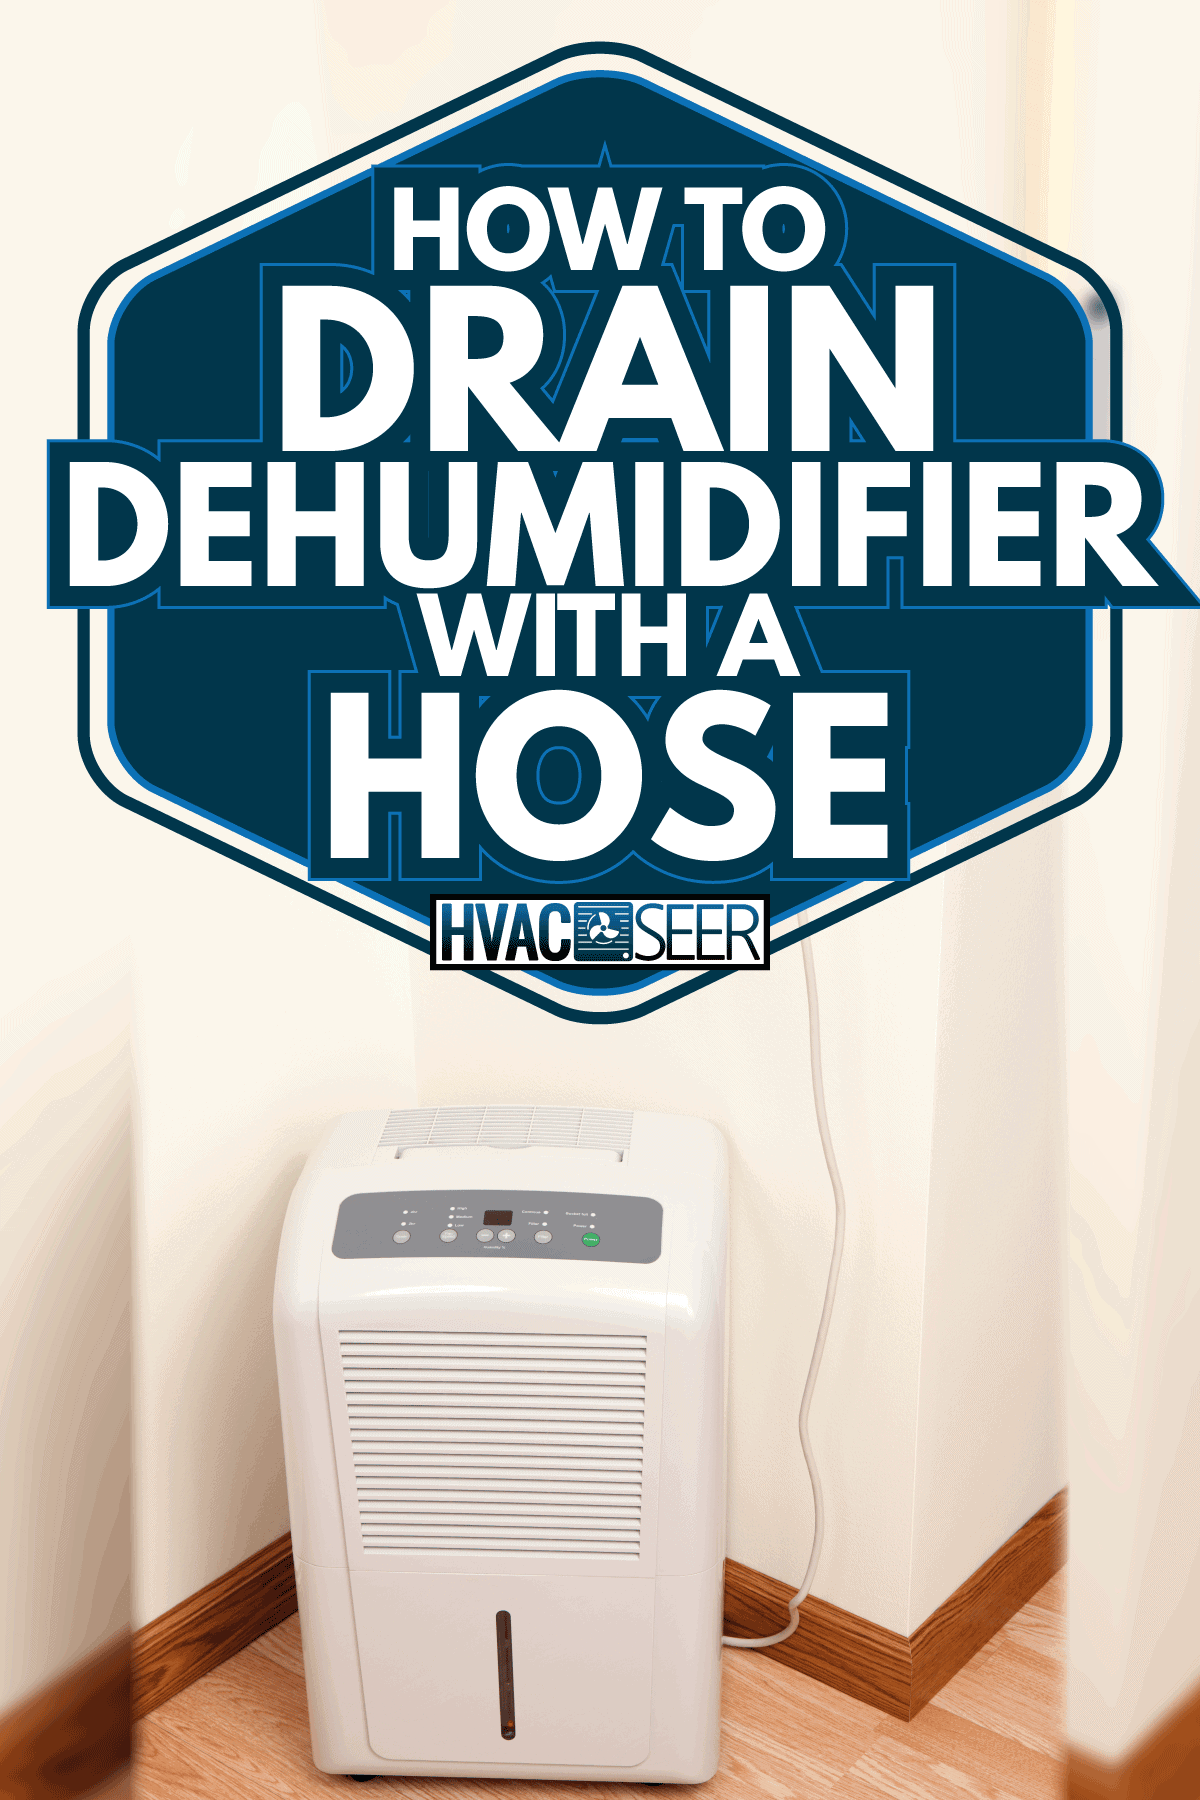 Dehumidifier plugged into a smart electric meter. How To Drain Dehumidifier With A Hose